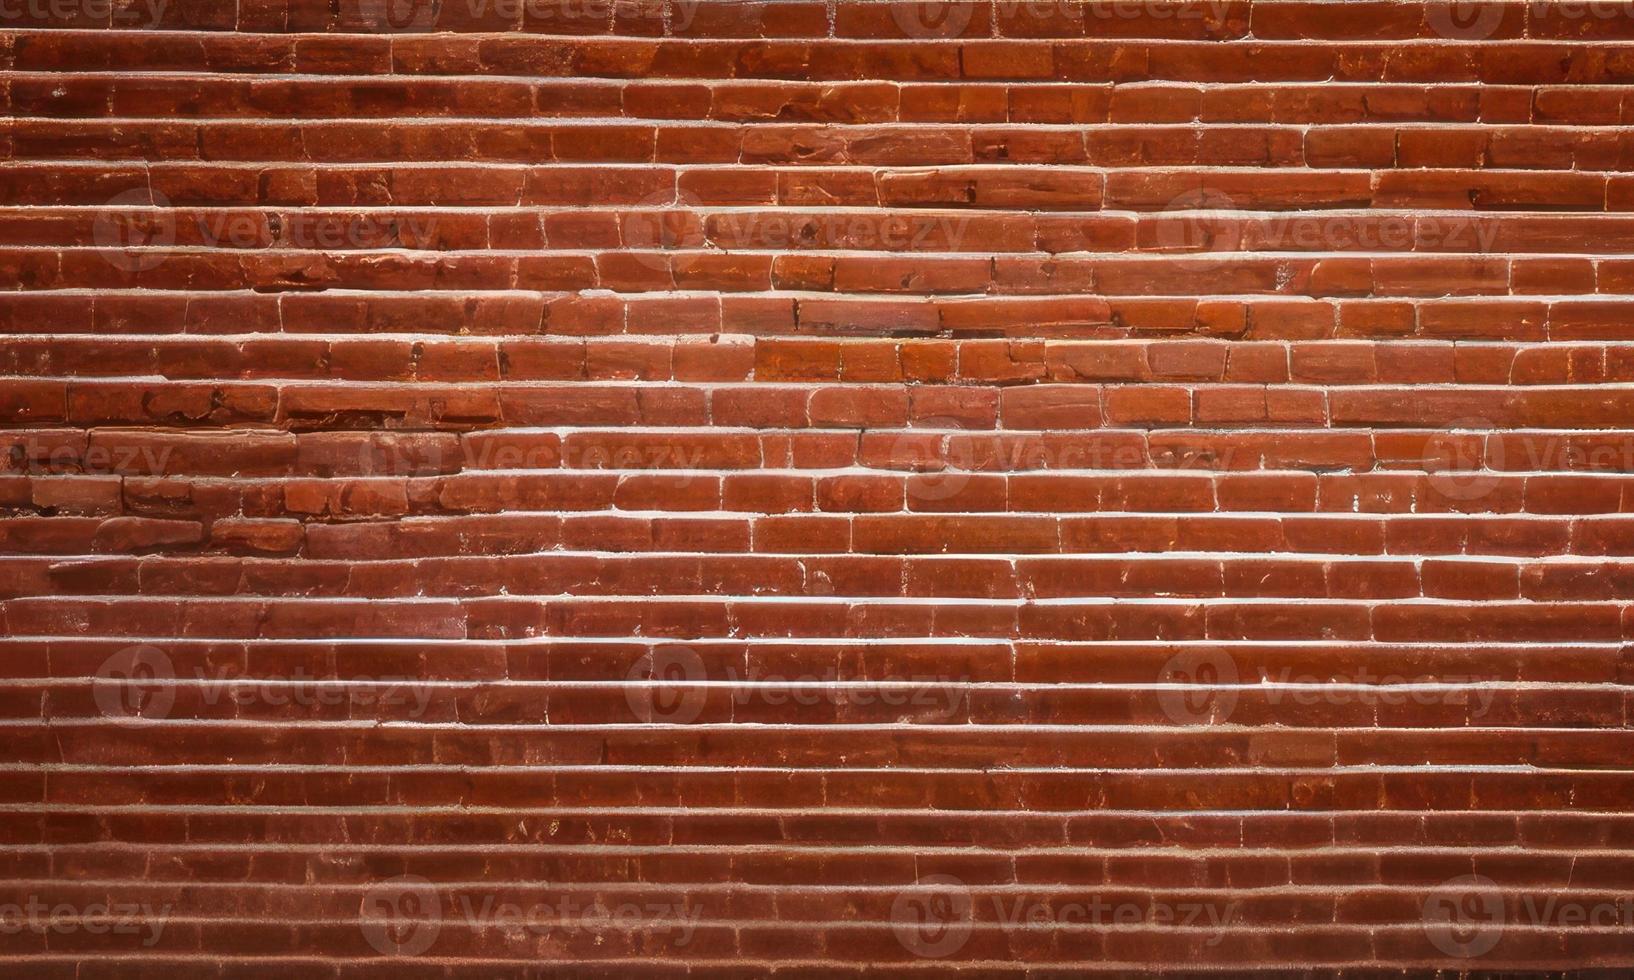 red brick wall texture background photo